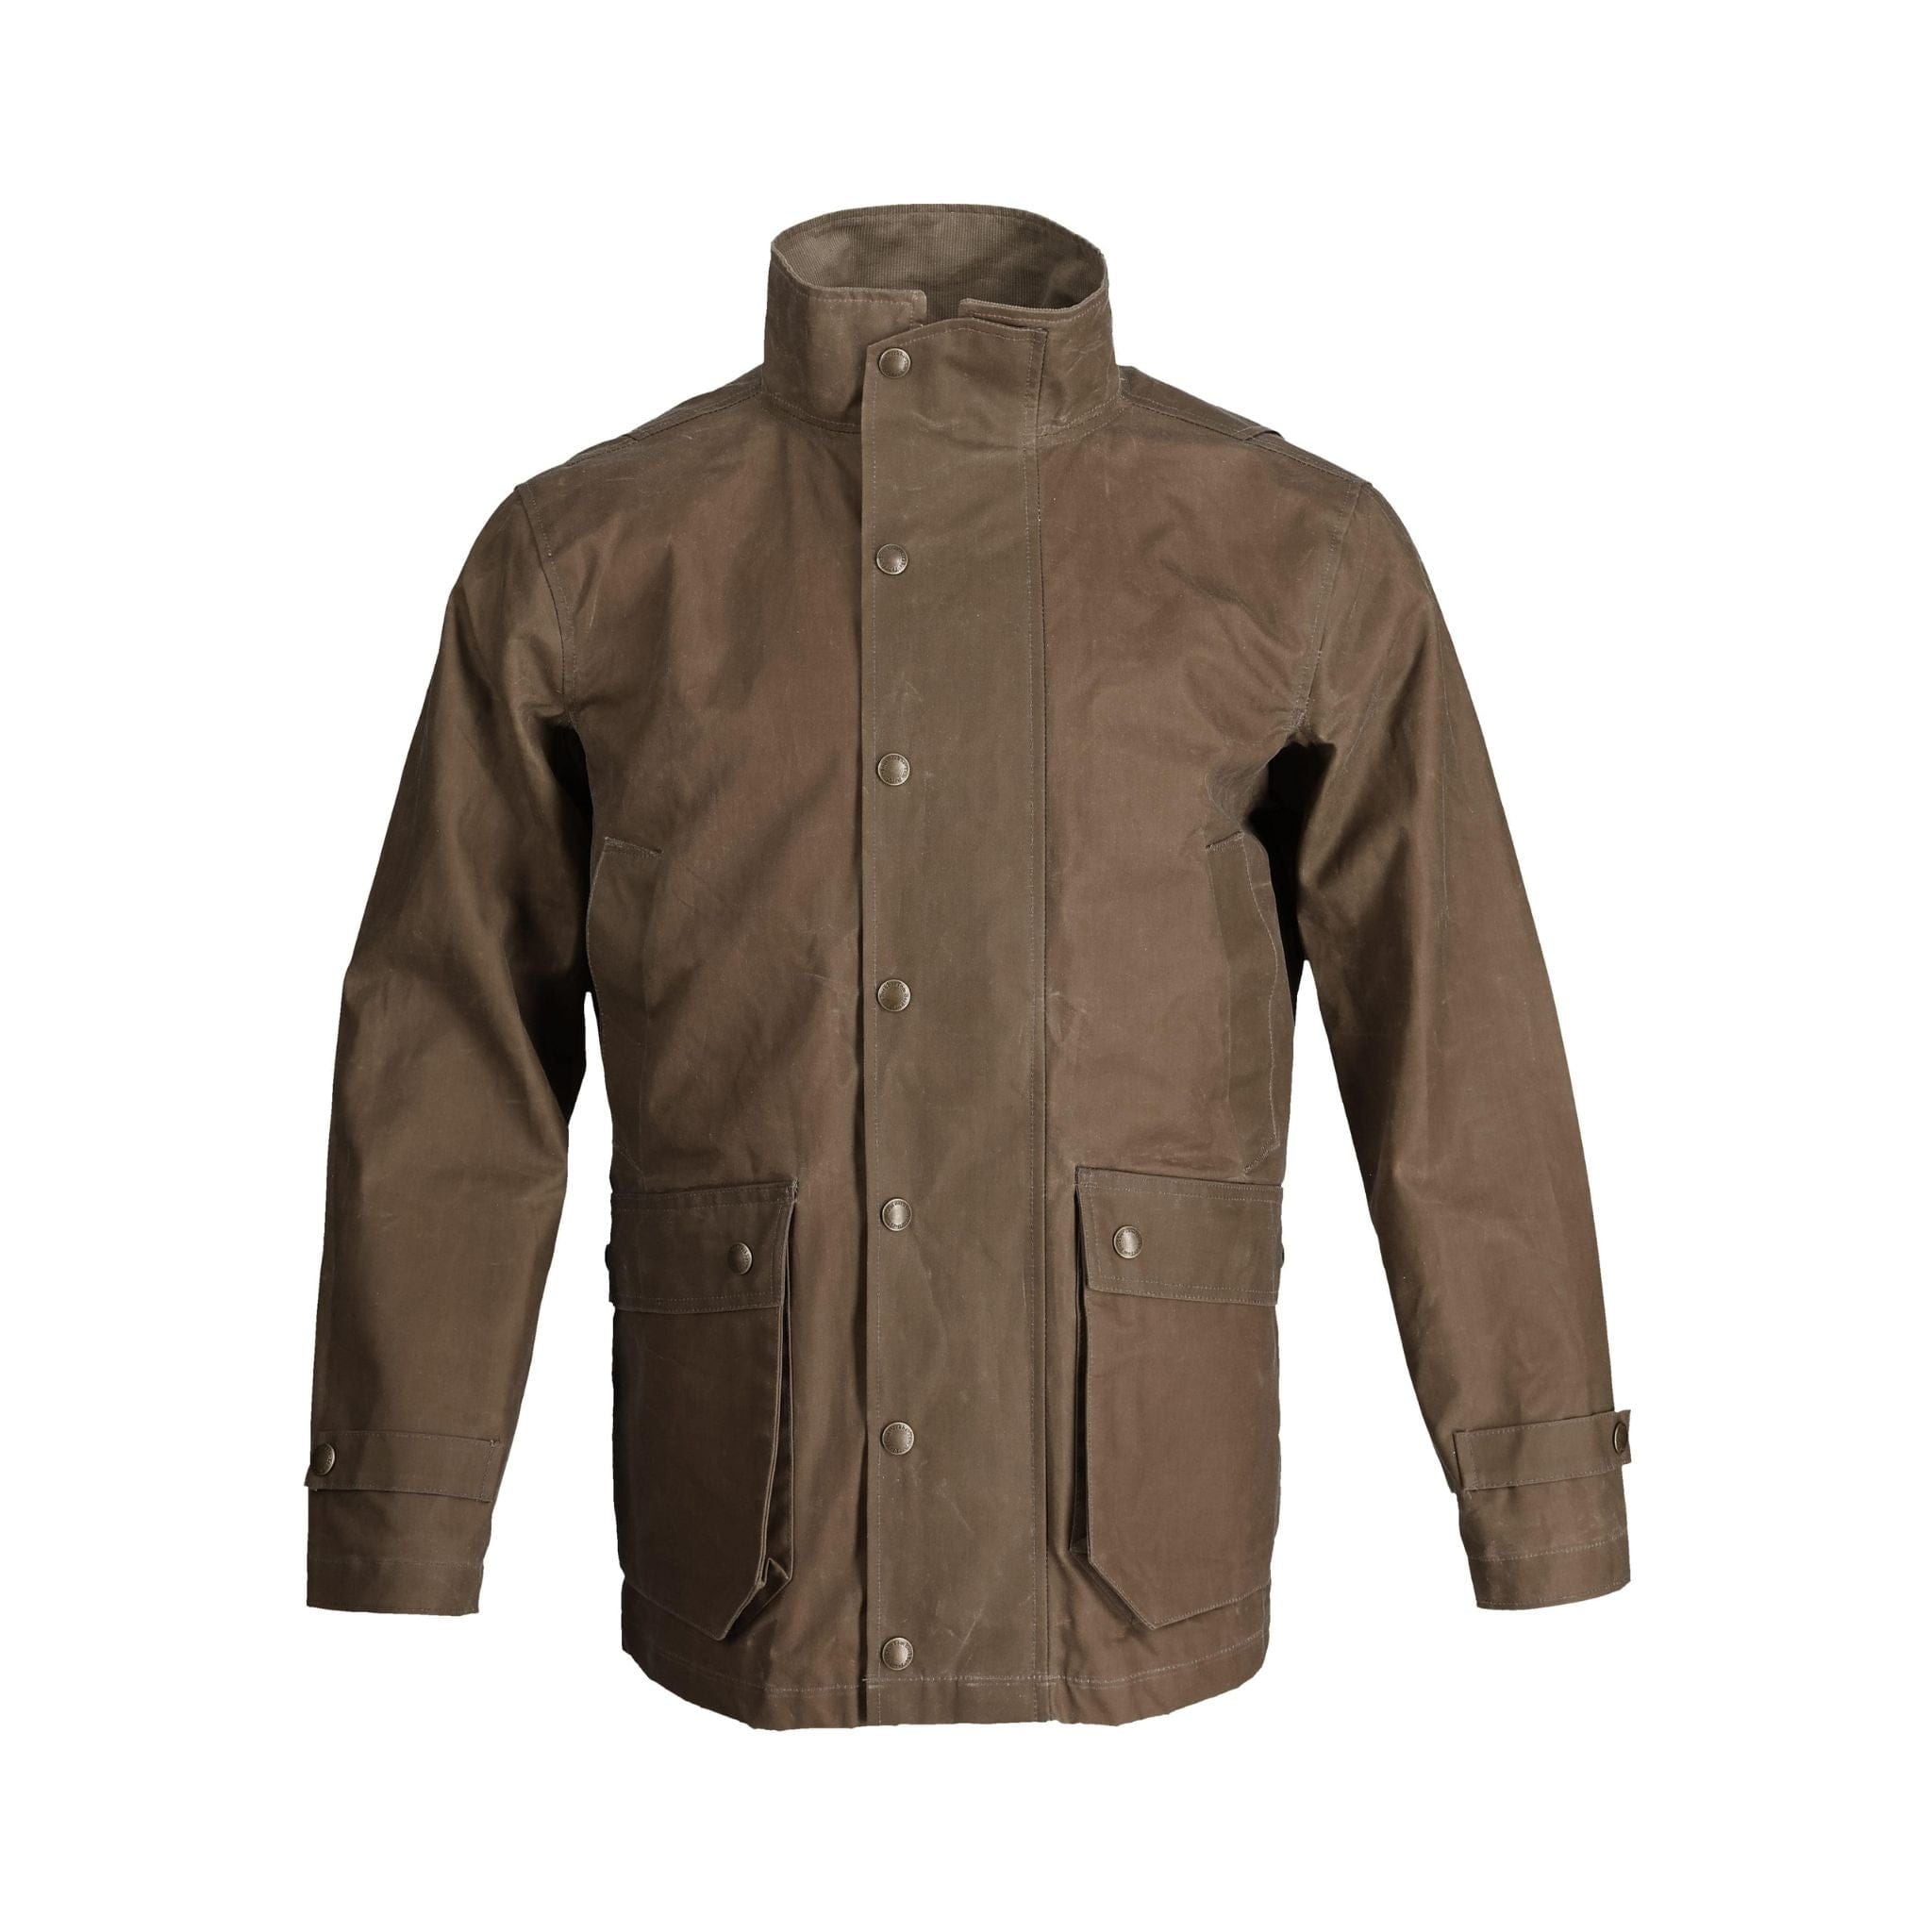 Upland Hunting Gear & Clothing